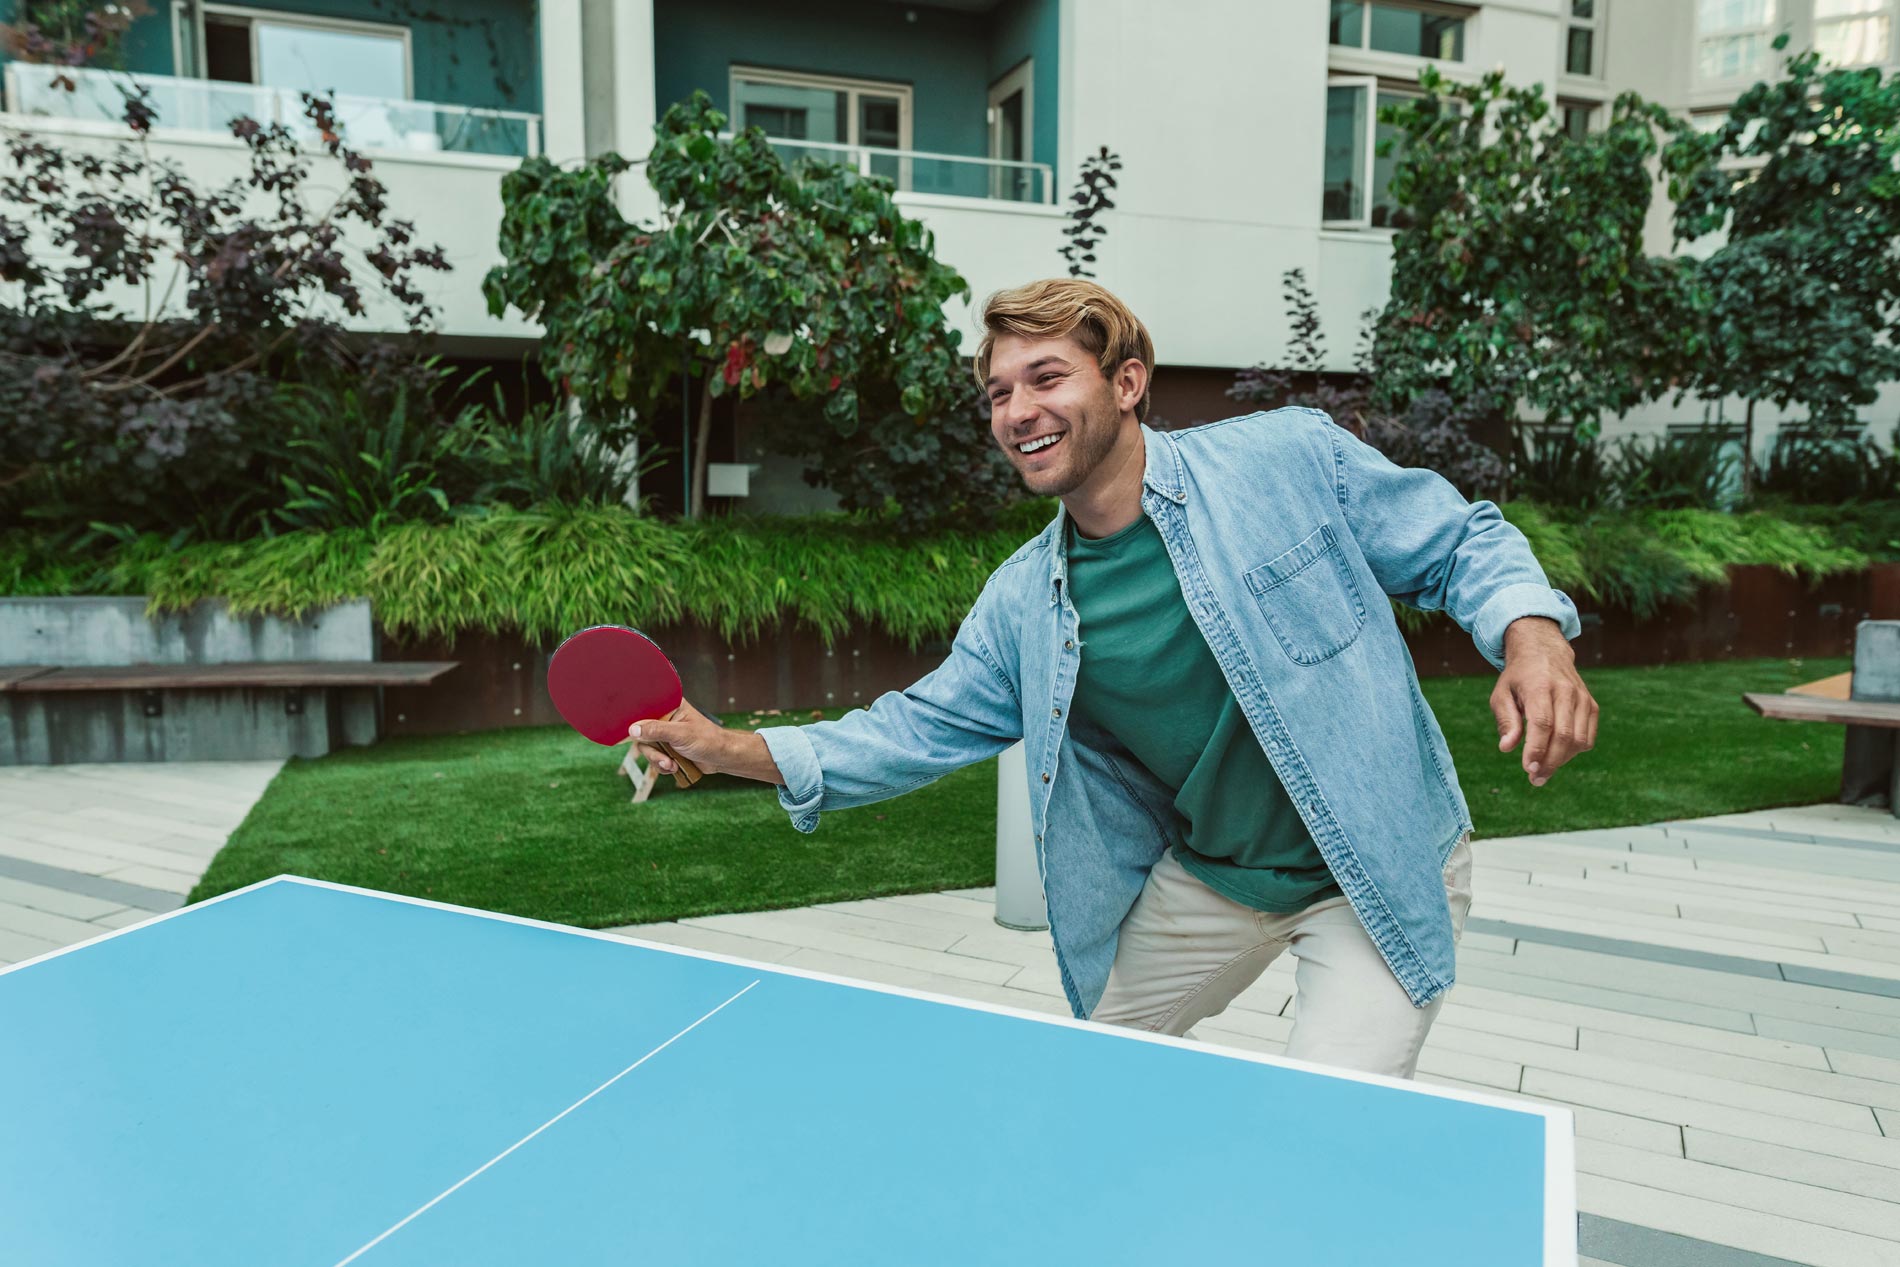 Channel Mission Bay man playing ping pong in courtyard